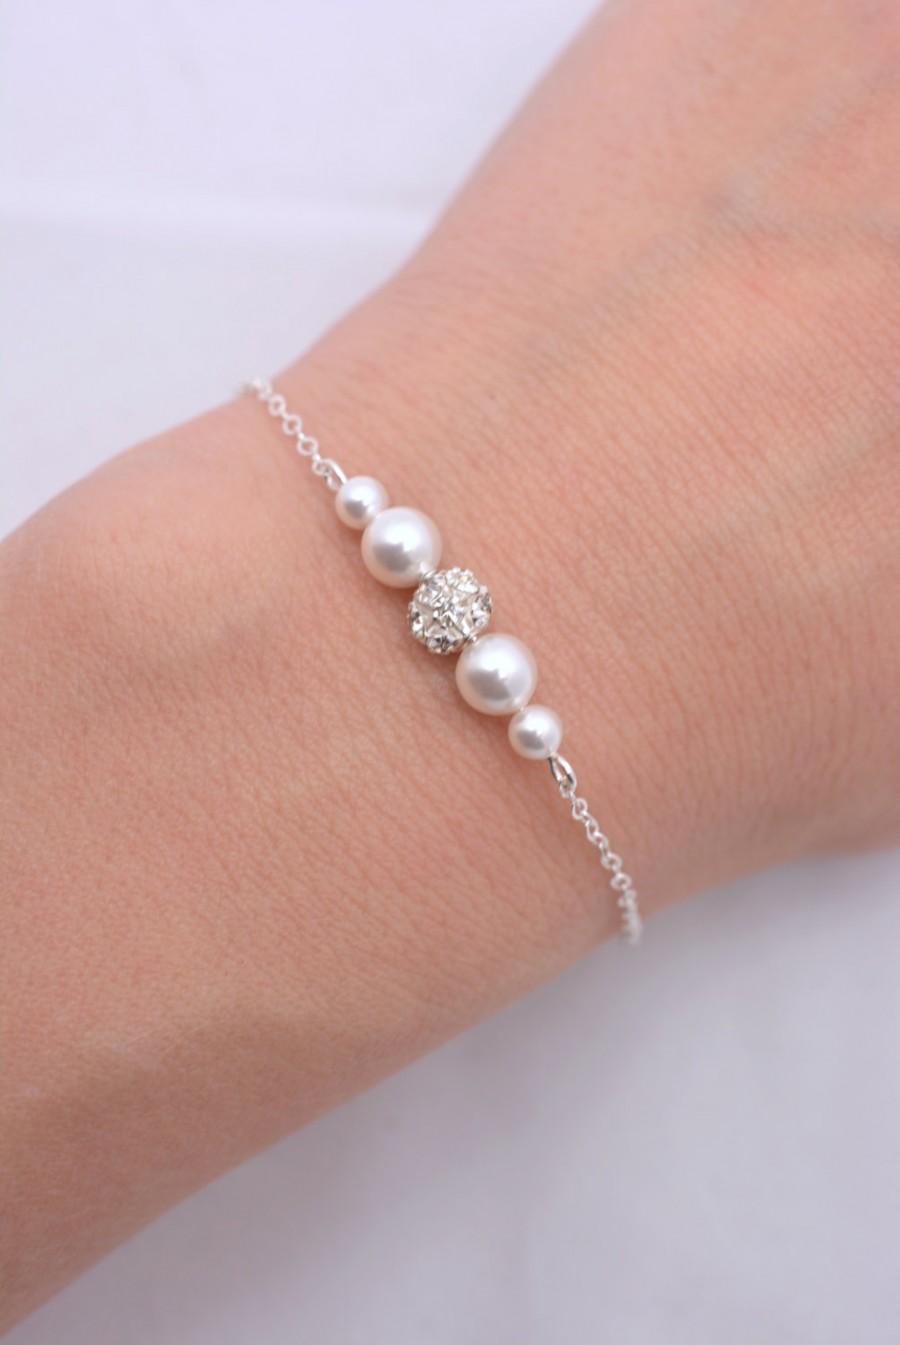 Mariage - Set of 7 Pearl and Rhinestone Bracelets, 7 Bridesmaid Bracelets, Pearl and Crystal Bracelets, Floating Pearl, Sterling Silver Chain 0224